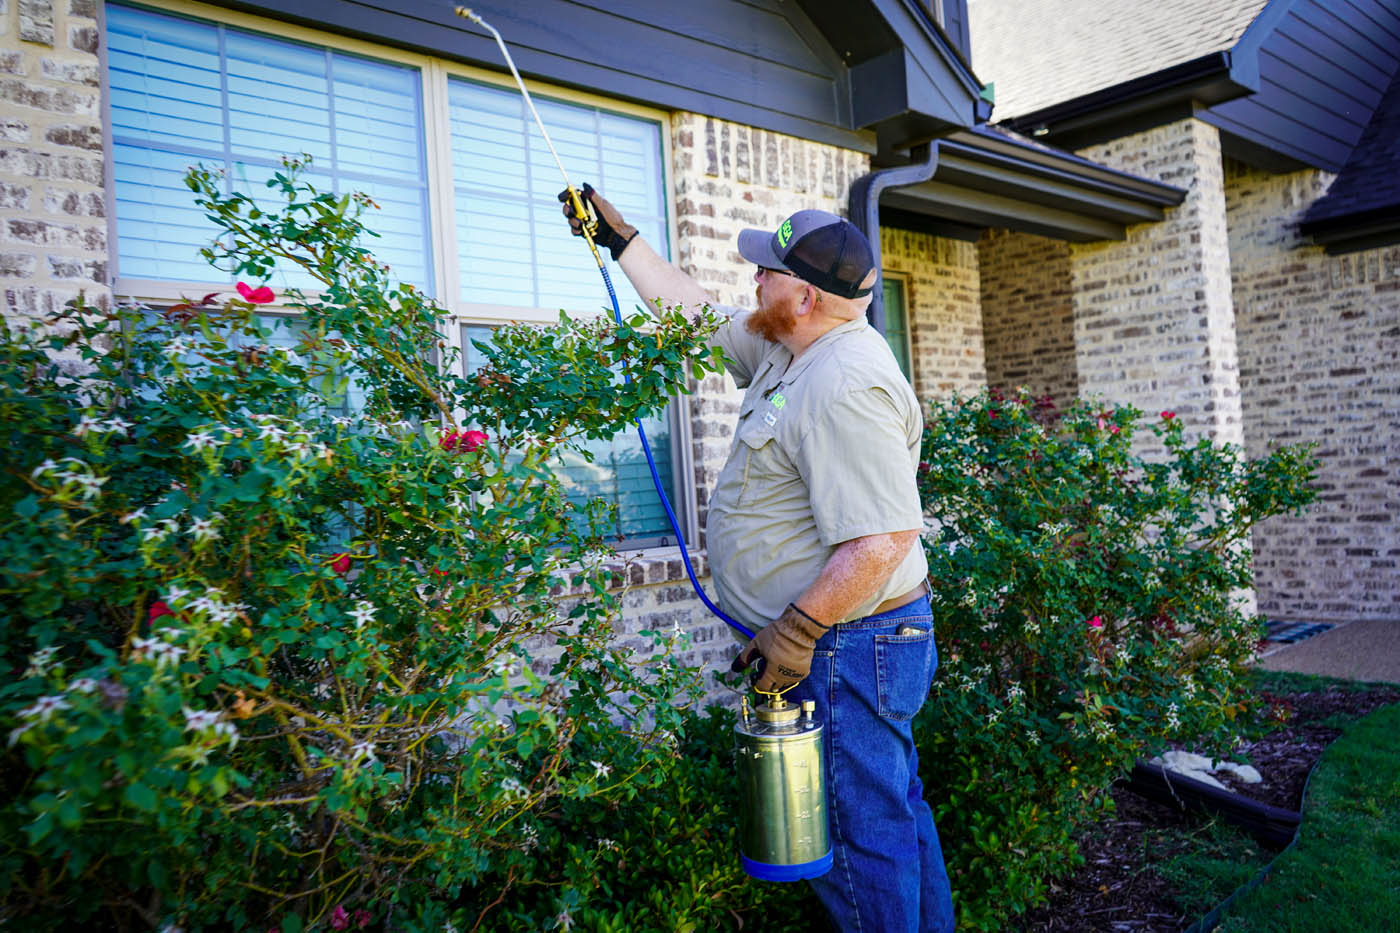 A GGA Pest Management technician spraying for residential pest control in Killeen, TX.